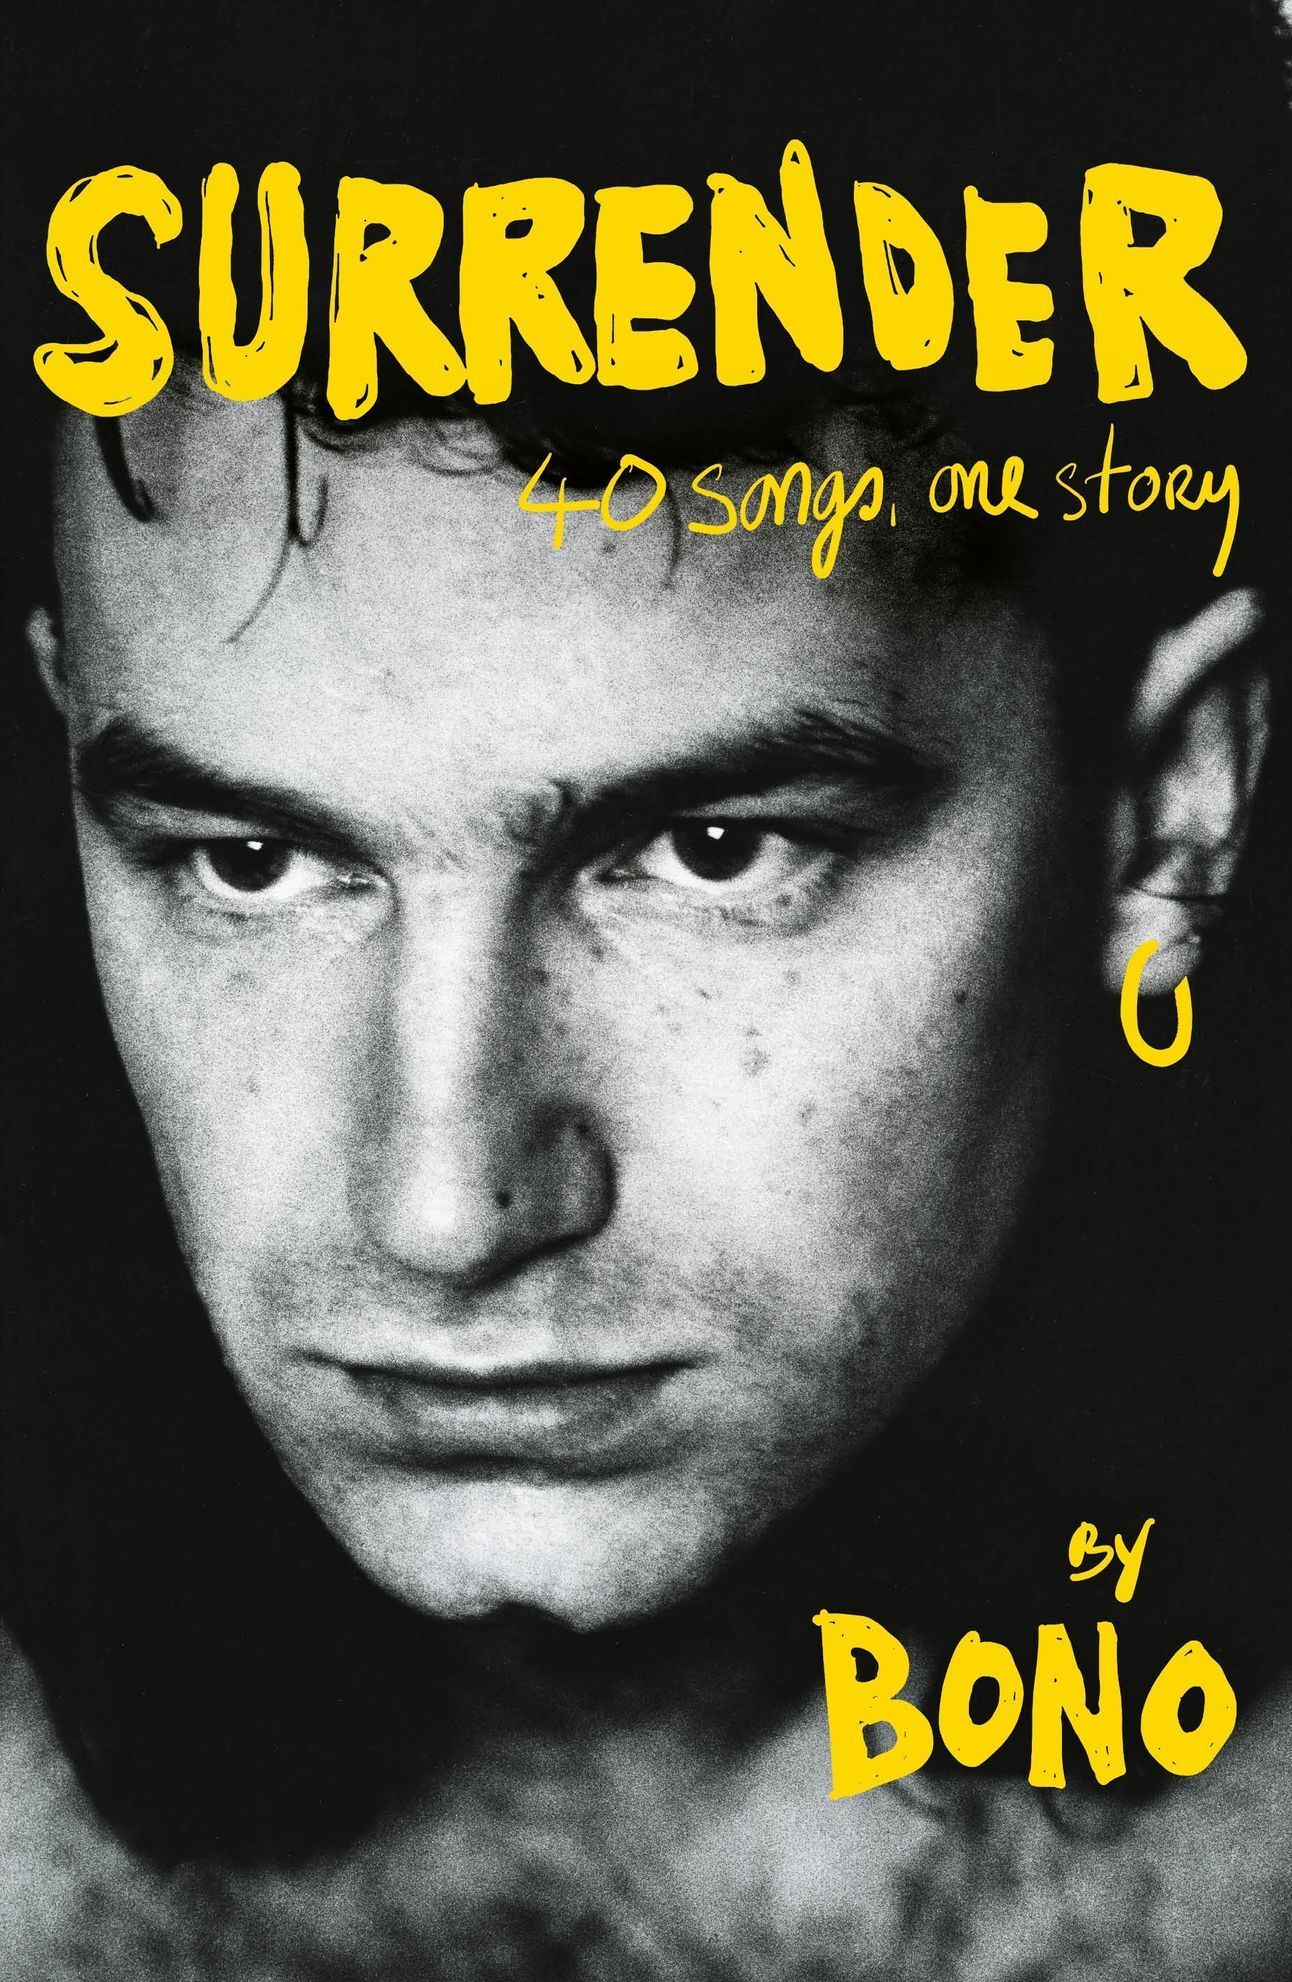 Bono: Surrender – 40 Songs, One Story